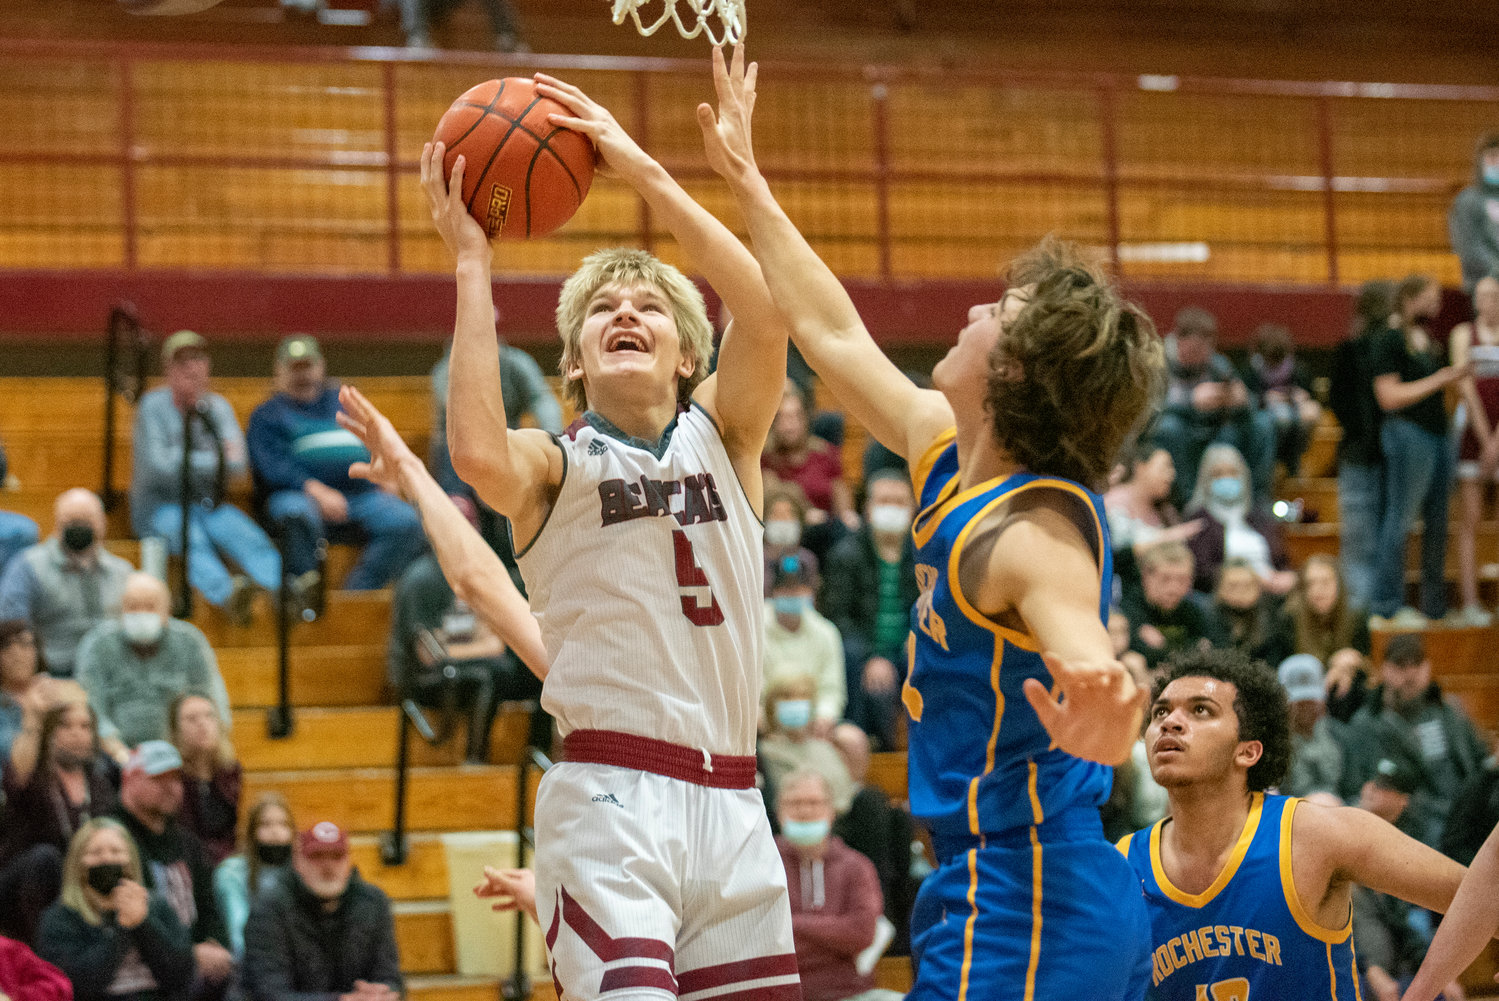 W.F. West senior Dirk Plakinger (5) leaps for a layup against Rochester on Feb. 4.